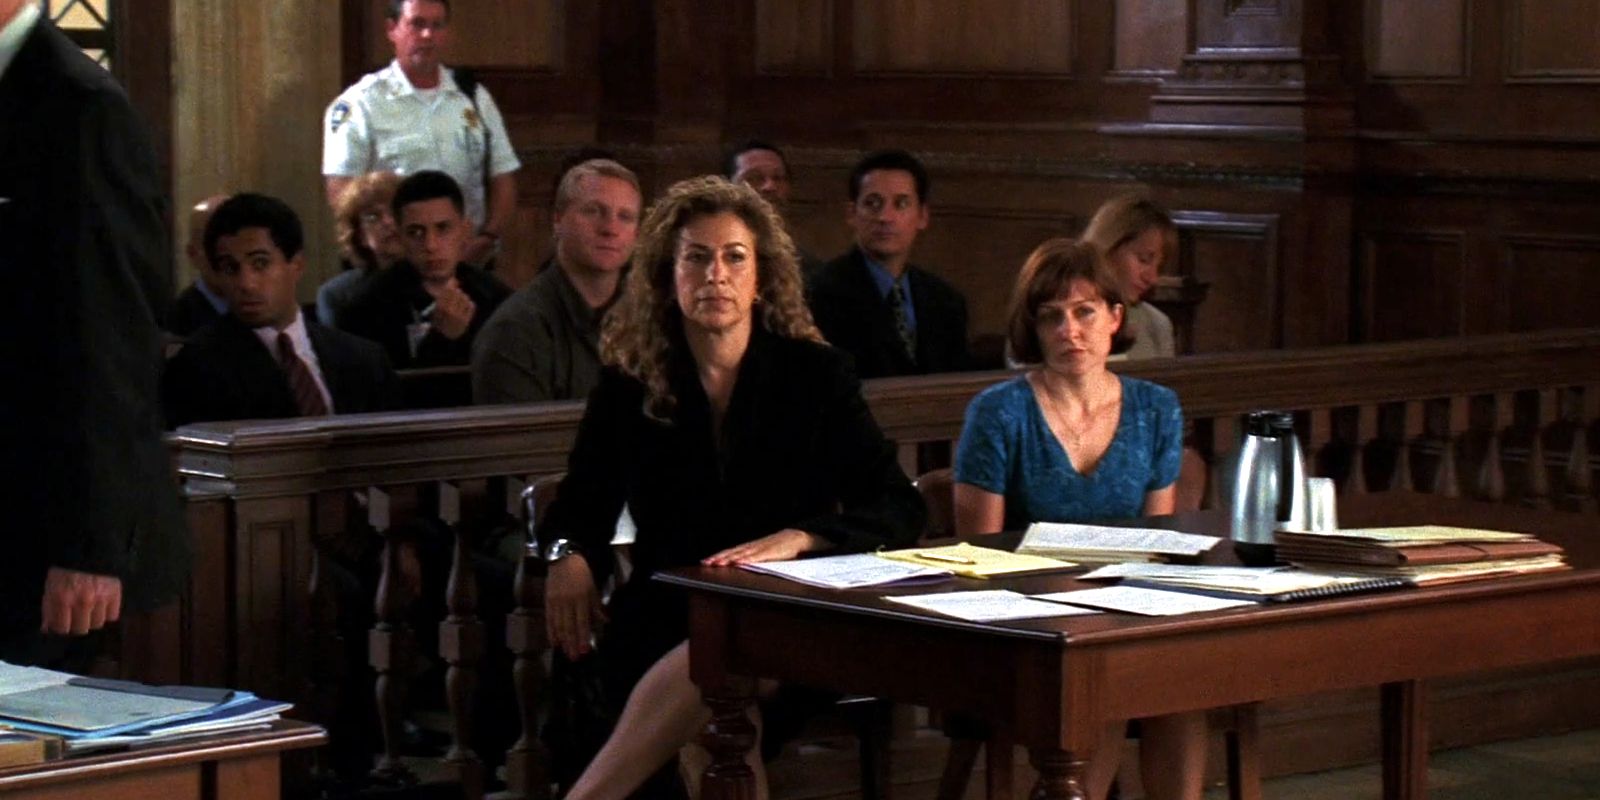 This picture shows the defense sitting at their table during a trial.